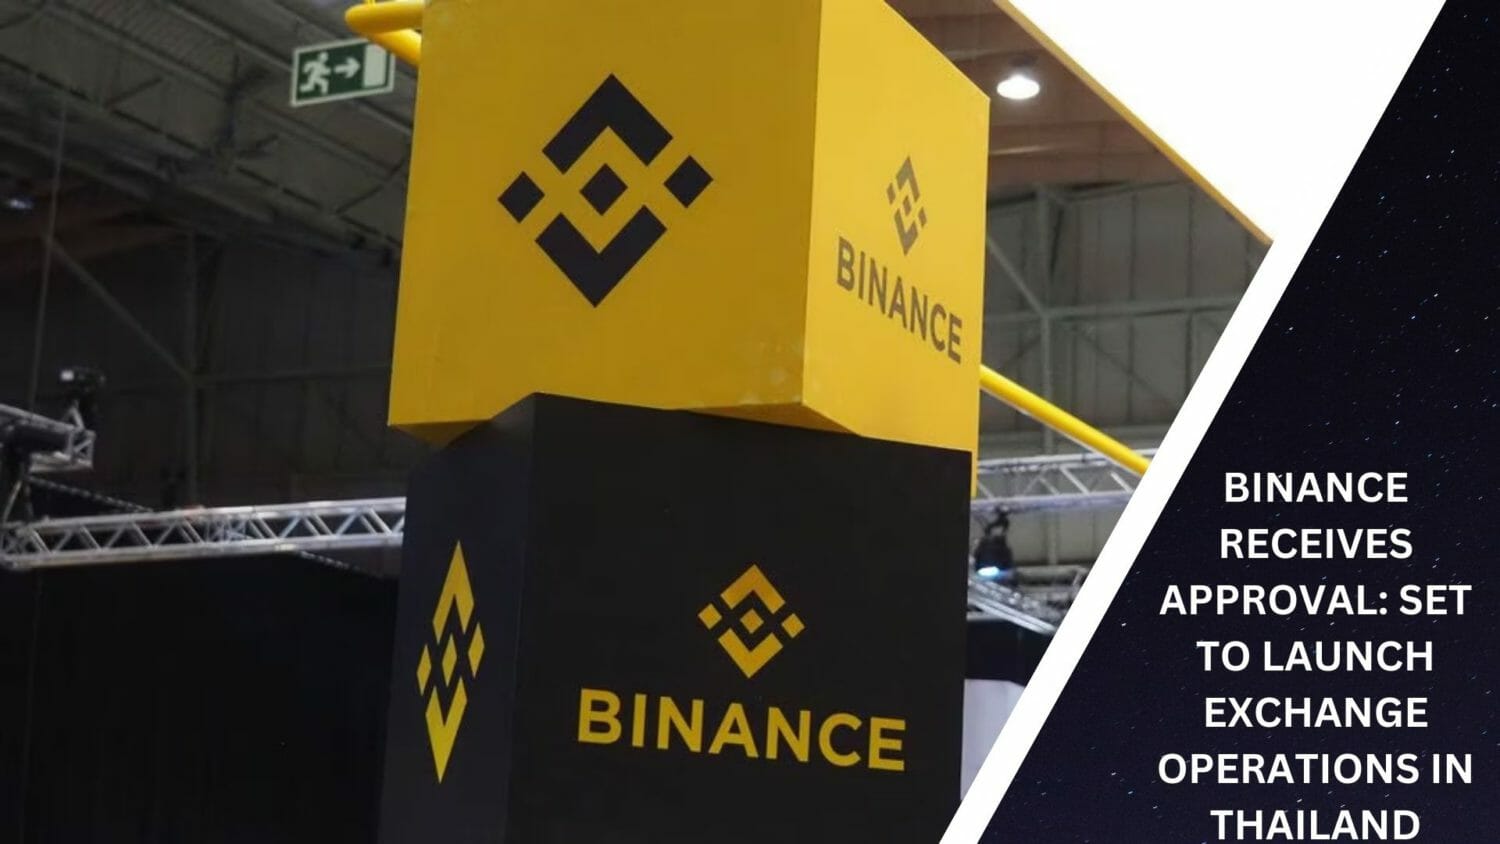 Binance Receives Approval: Set To Launch Exchange Operations In Thailand